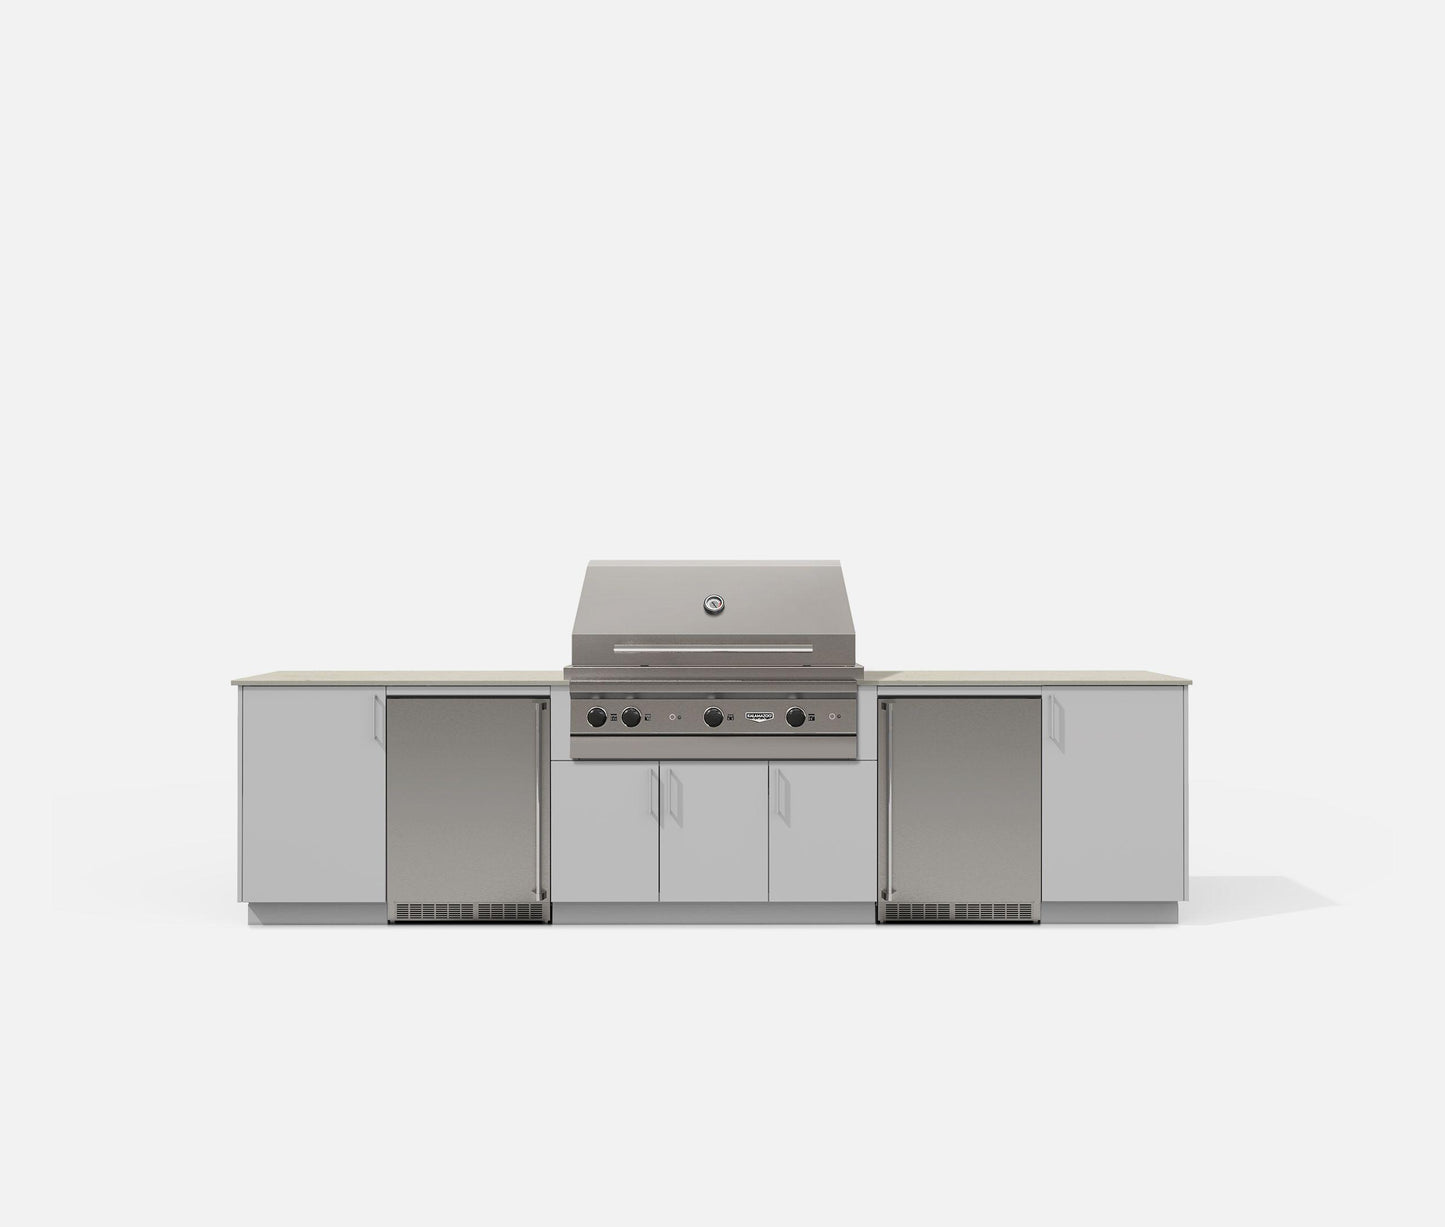 Urban Bonfire CTUNDRA42CHANTILLY Tundra 42 Outdoor Kitchen (Chantilly) GRILL SOLD SEPARATELY